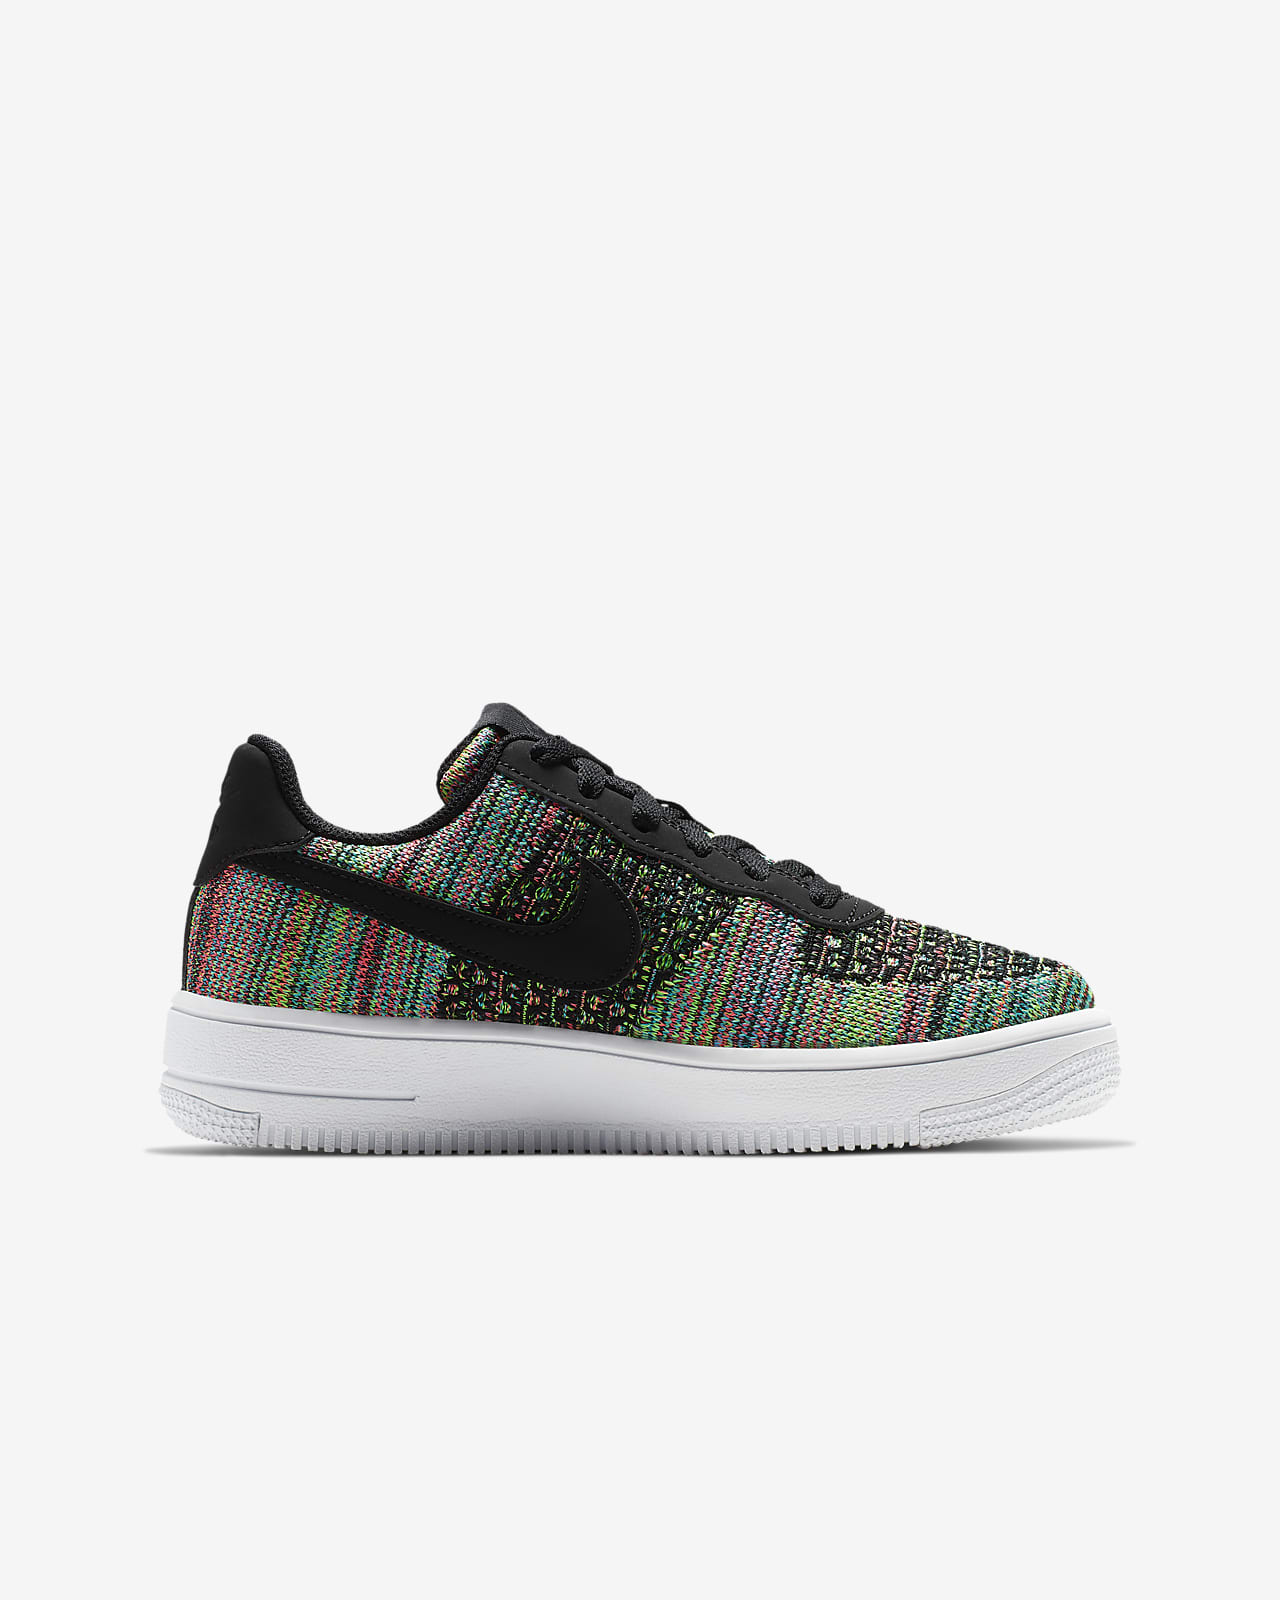 air force 1 flyknit 2.0 uomo